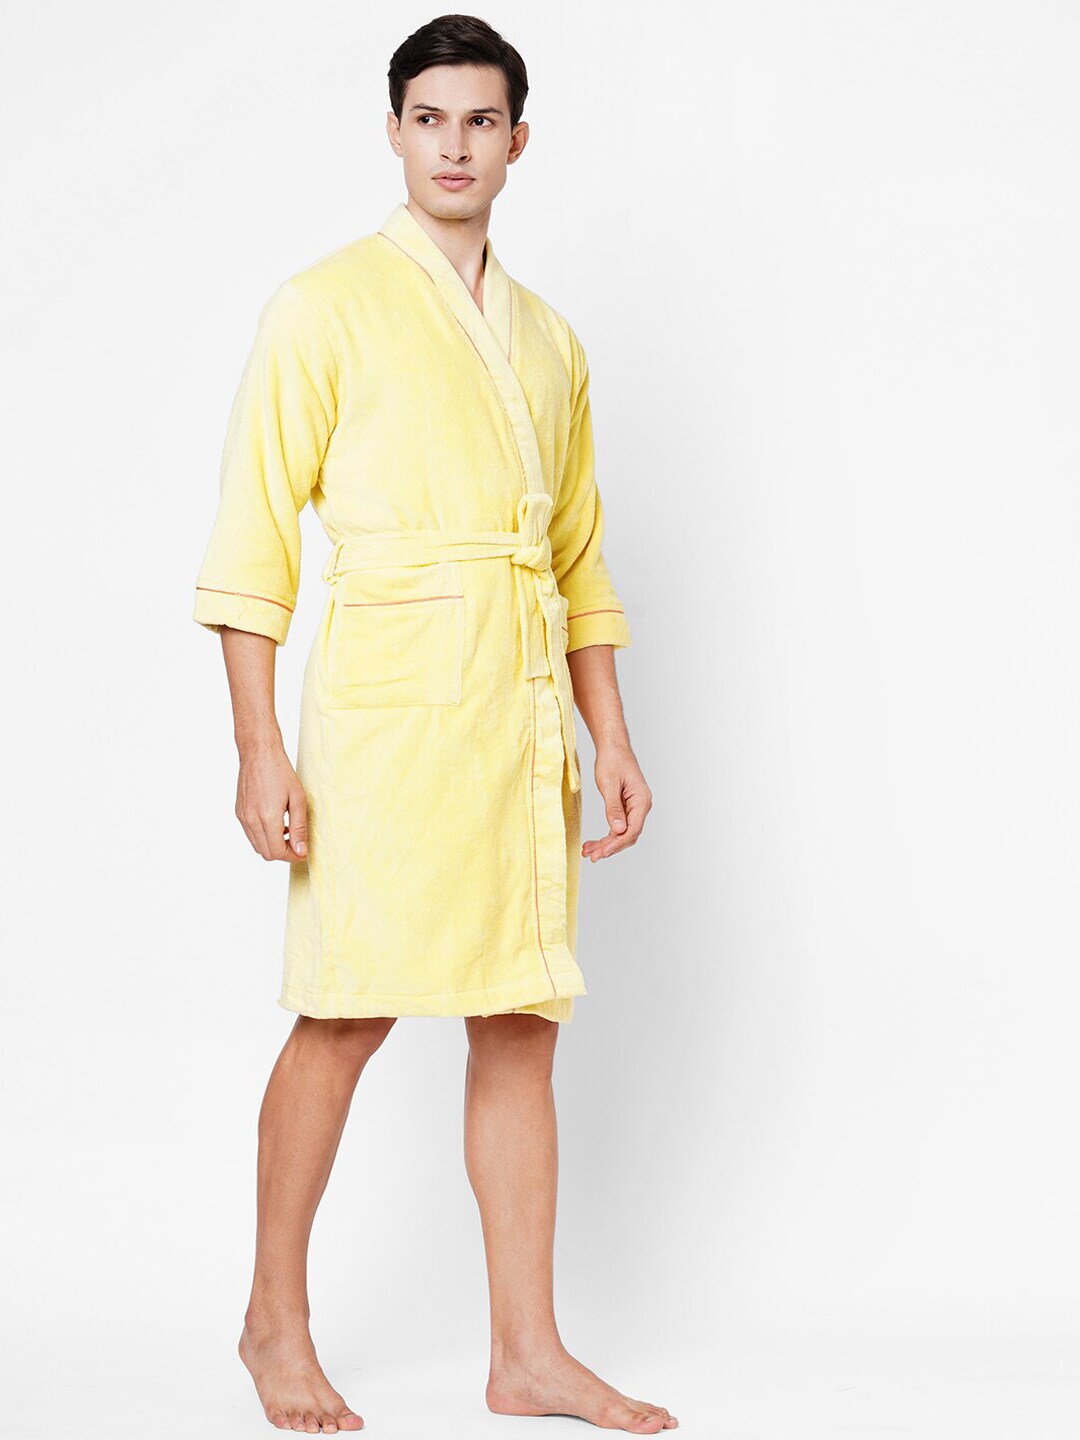 SPACES Unisex Yellow Solid Cotton Quick Dry Bath Robe Price in India